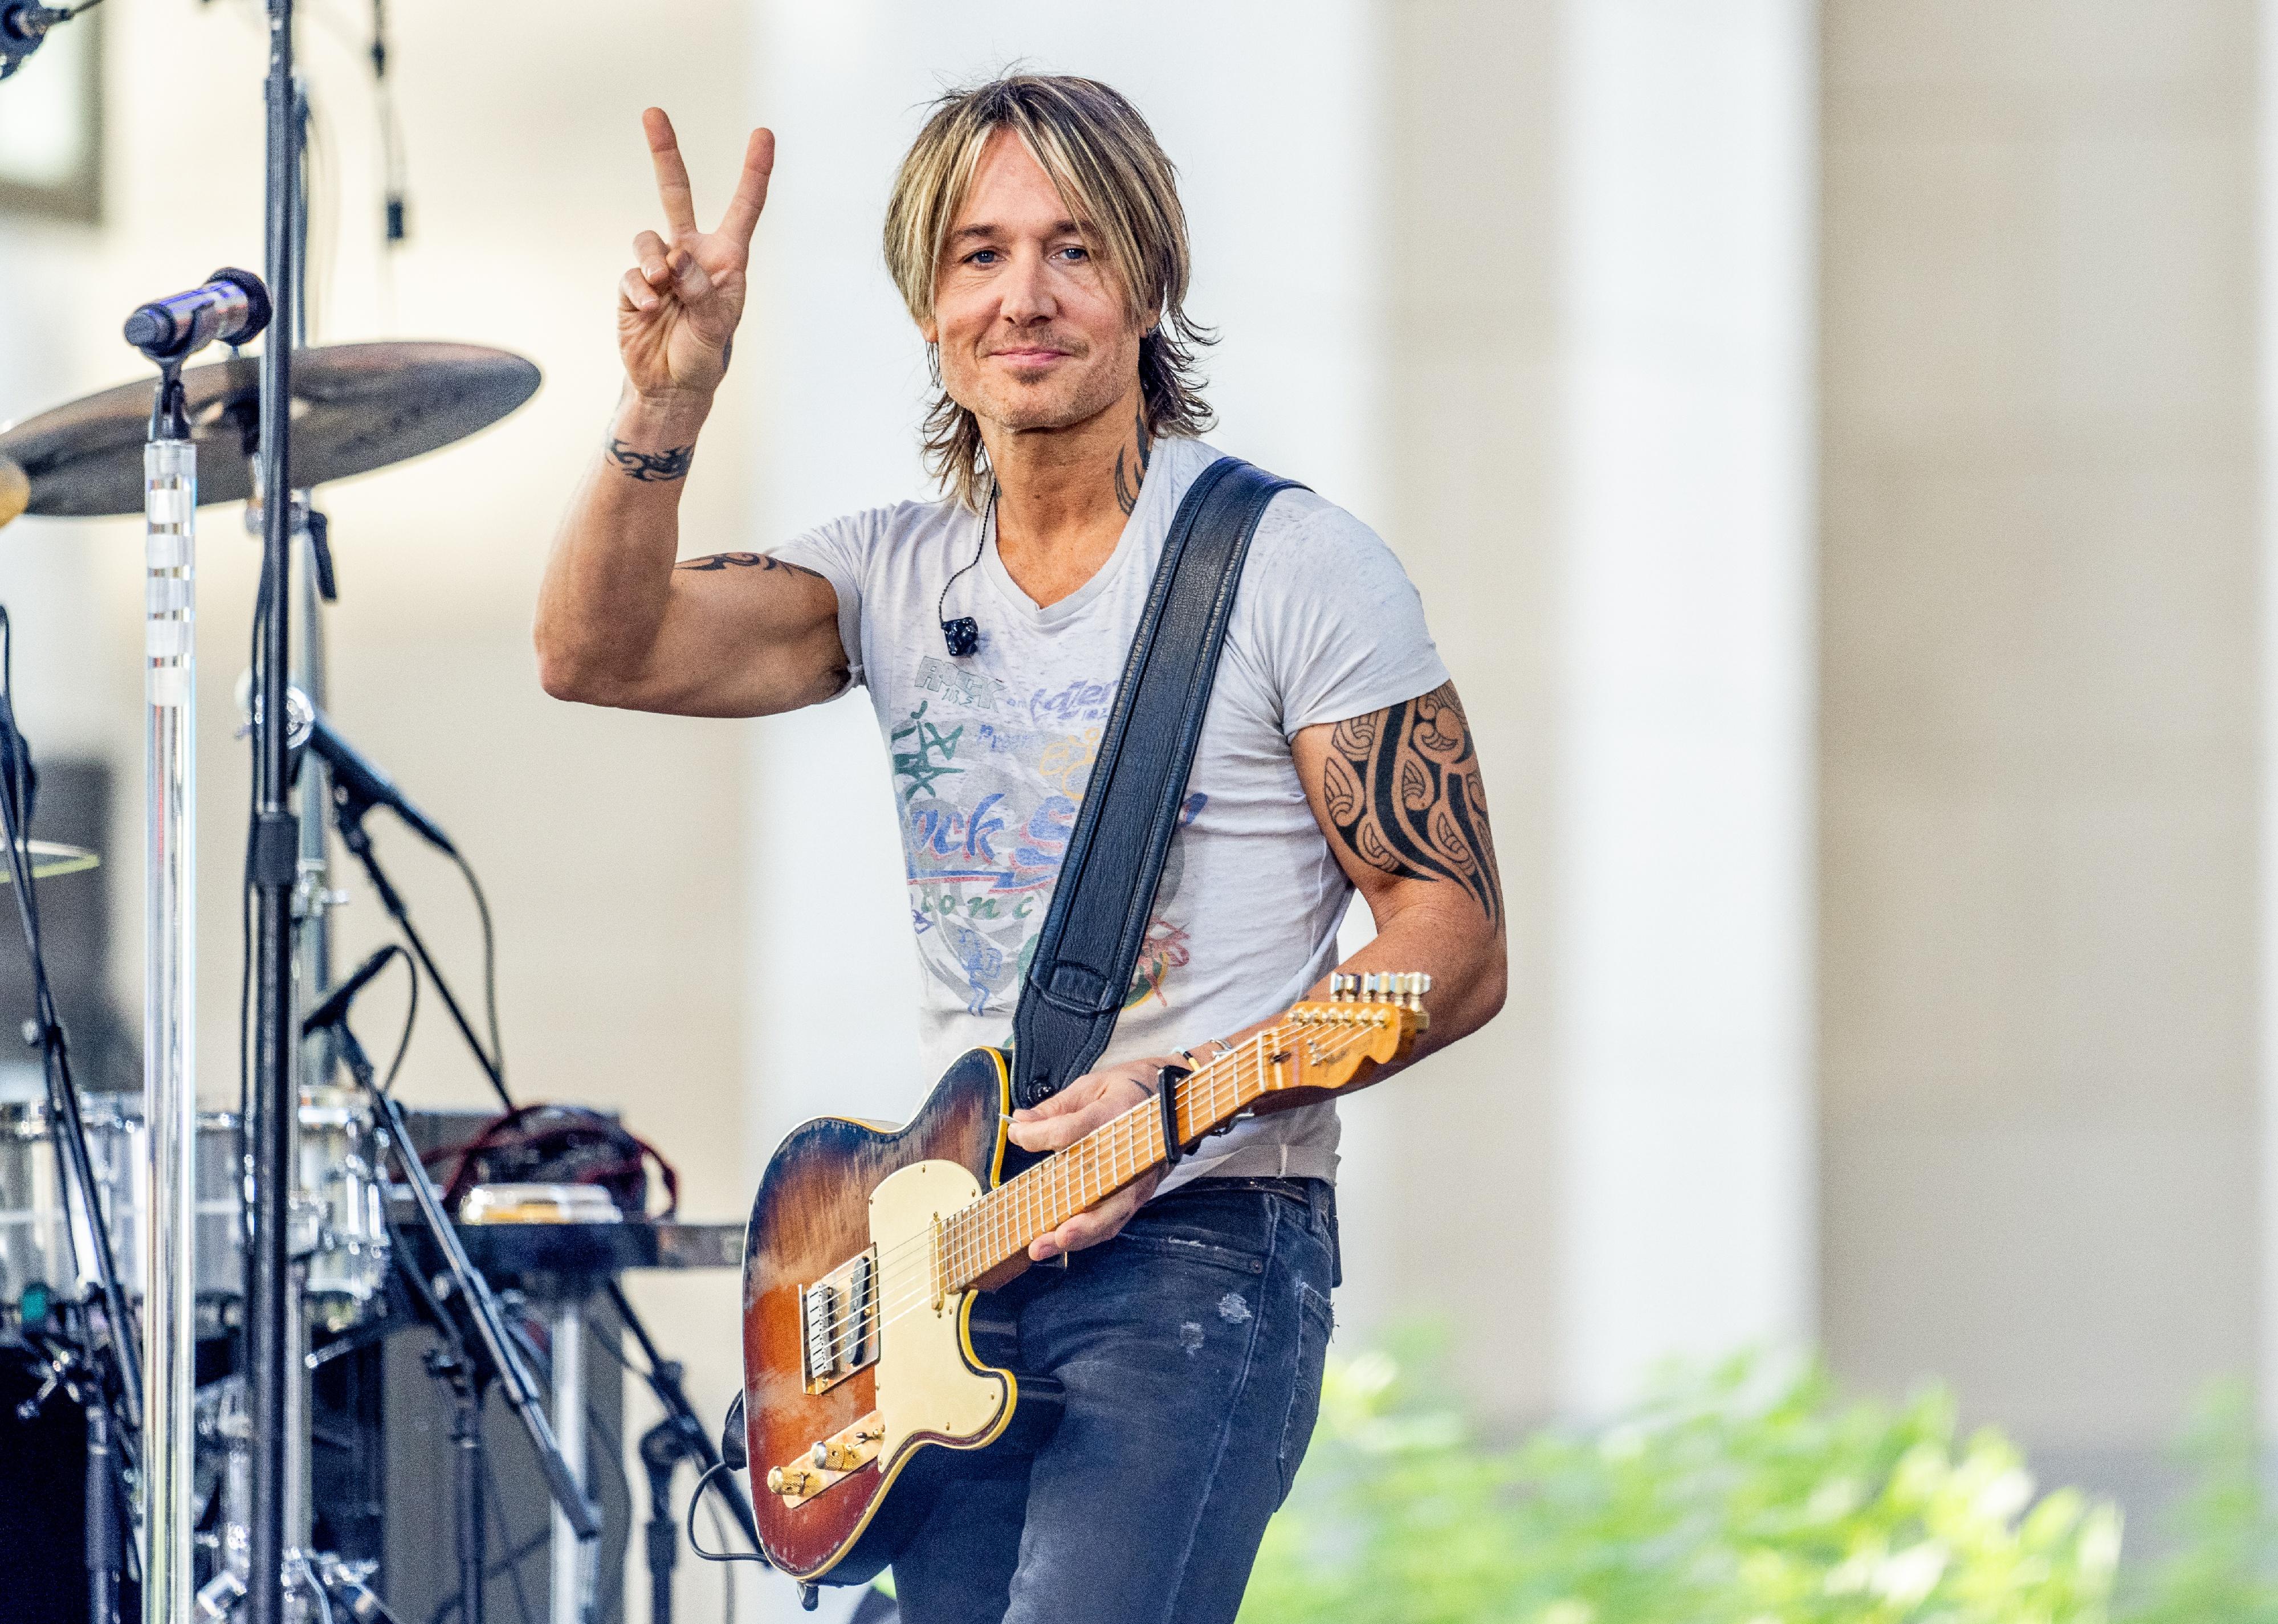 Keith Urban giving a peace sign onstage.